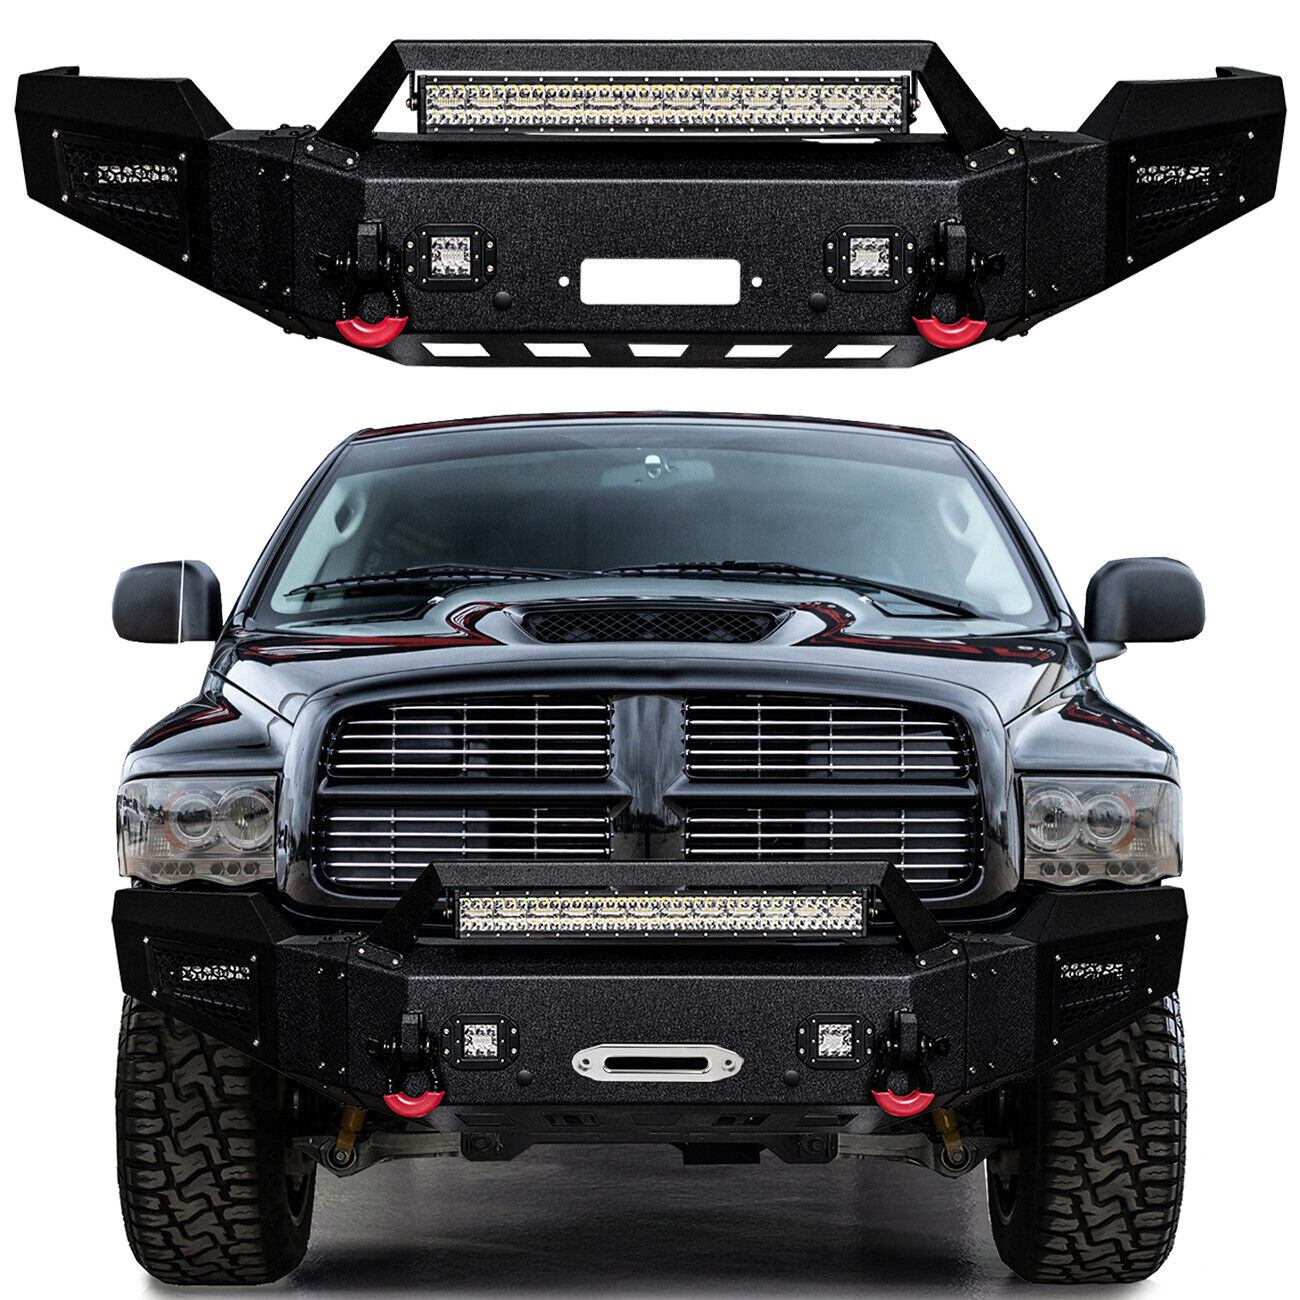 For 2003-2005 Dodge Ram 2500 3500 Front Bumper With Winch Plate and LED Lights